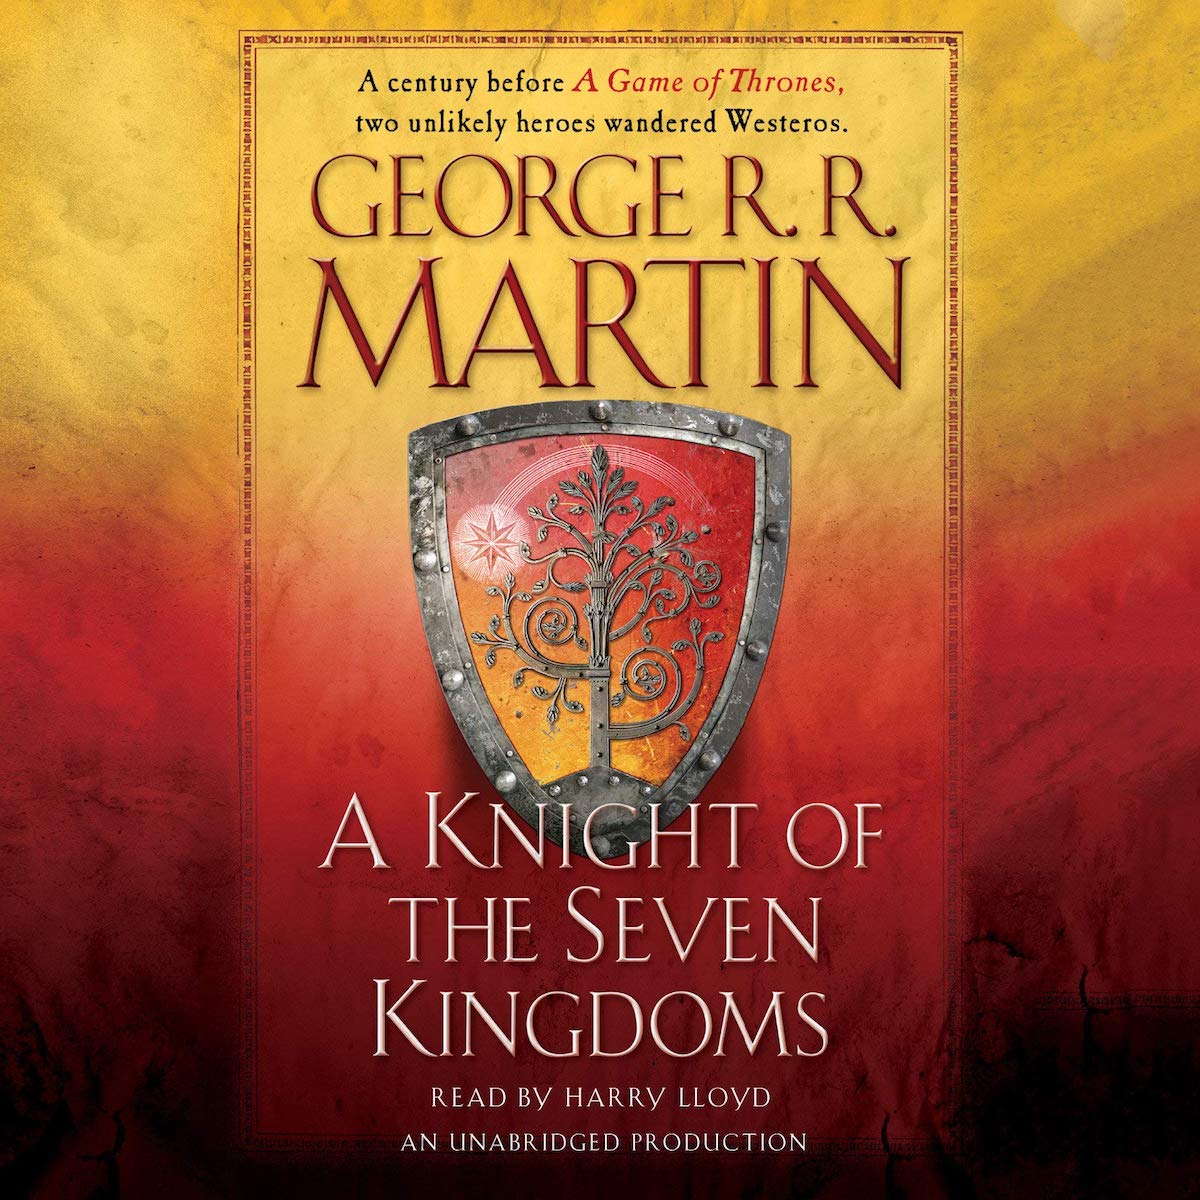 A Knight of the Seven Kingdoms book cover